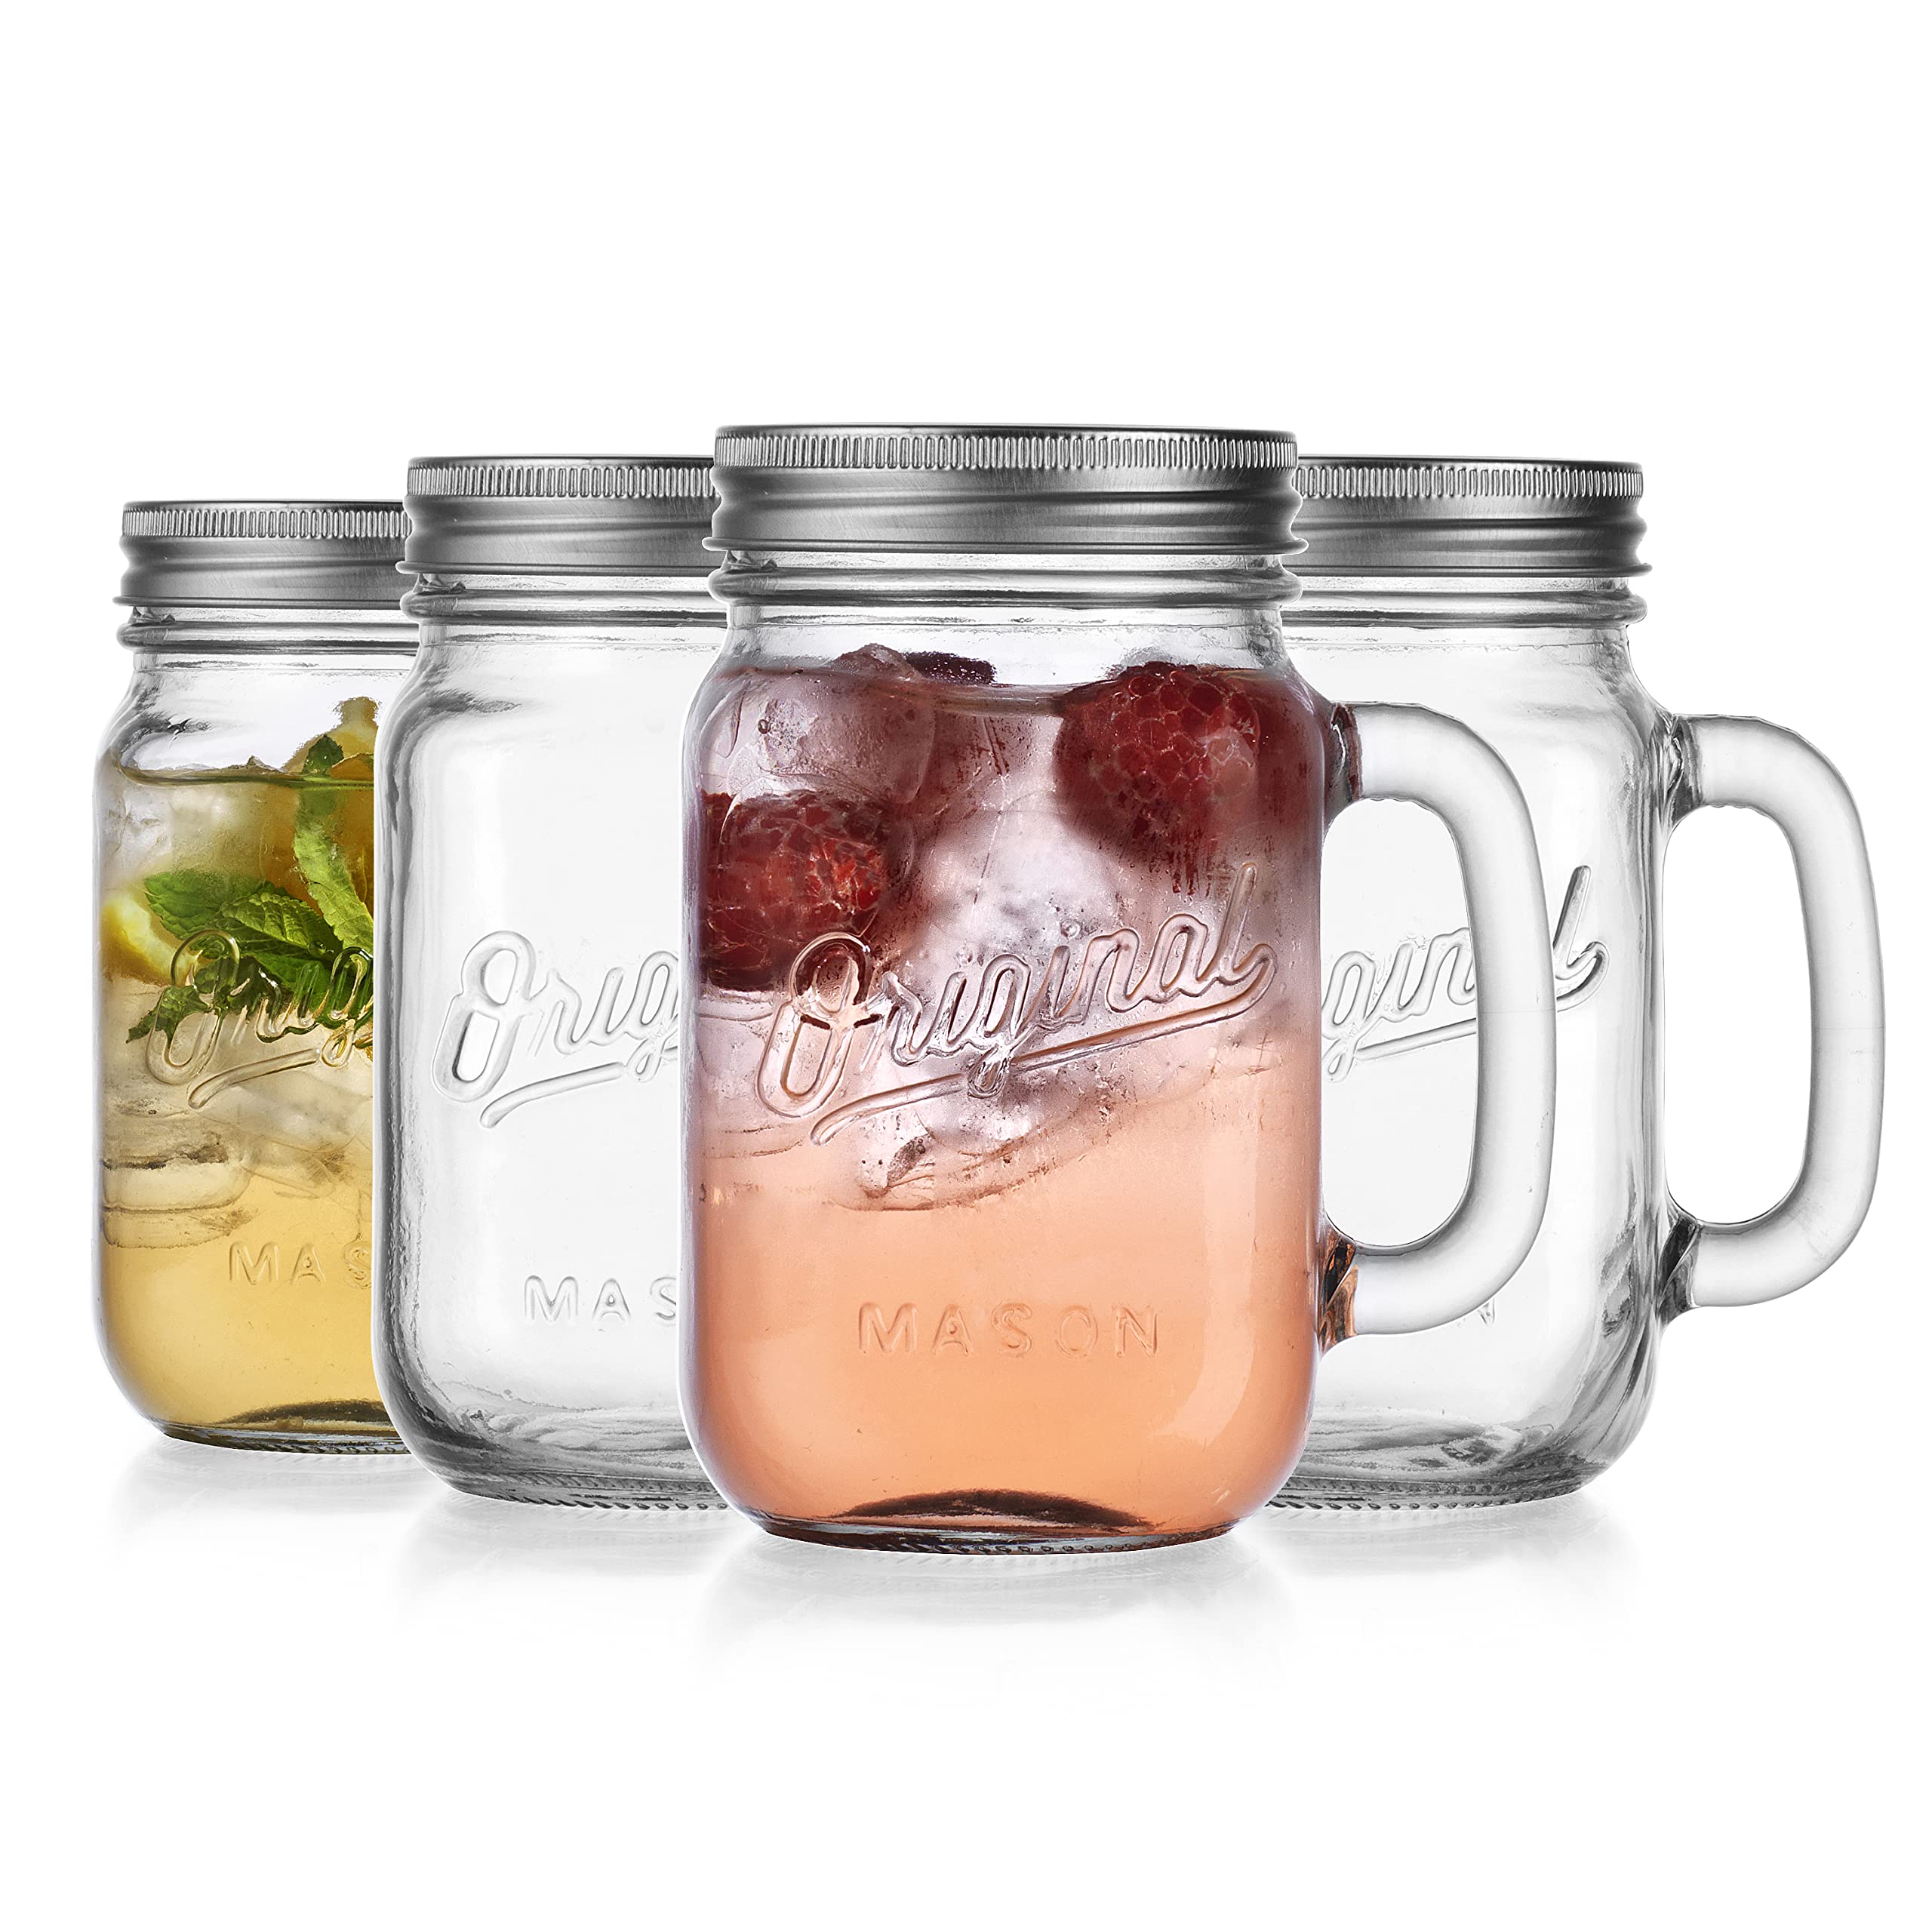 Mason Jar 16 Oz. Glass Mugs with Handle and Lid Set Of 4 - Home Essentials & Beyond - Old Fashioned Drinking Glass Bottles Original Mason Jar Pint Sized Cup Set.  - Acceptable